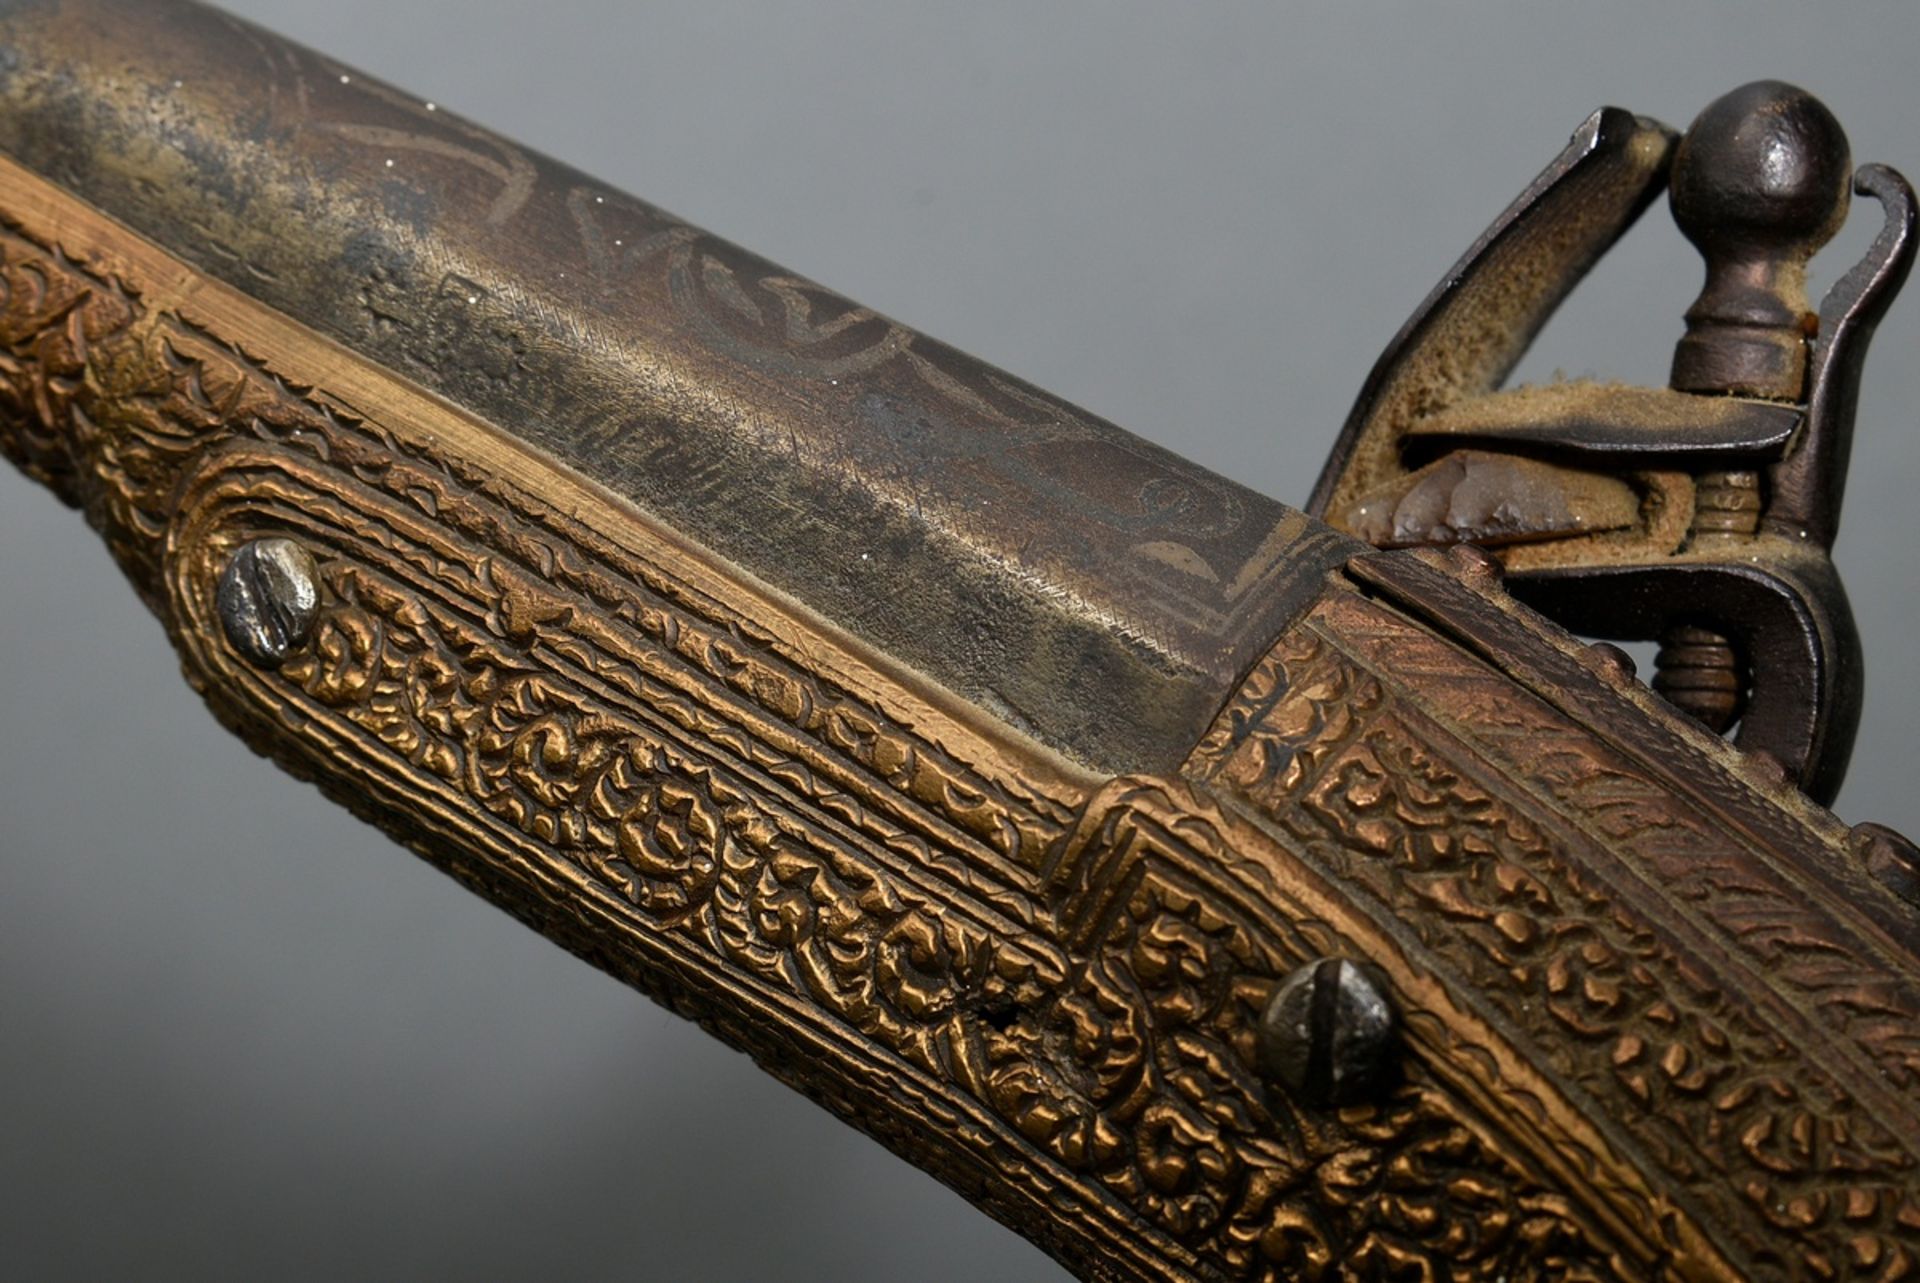 2 Ottoman muzzle loading flintlock pistols, smooth bore with engraved brass overlay, calibre 14mm,  - Image 8 of 8